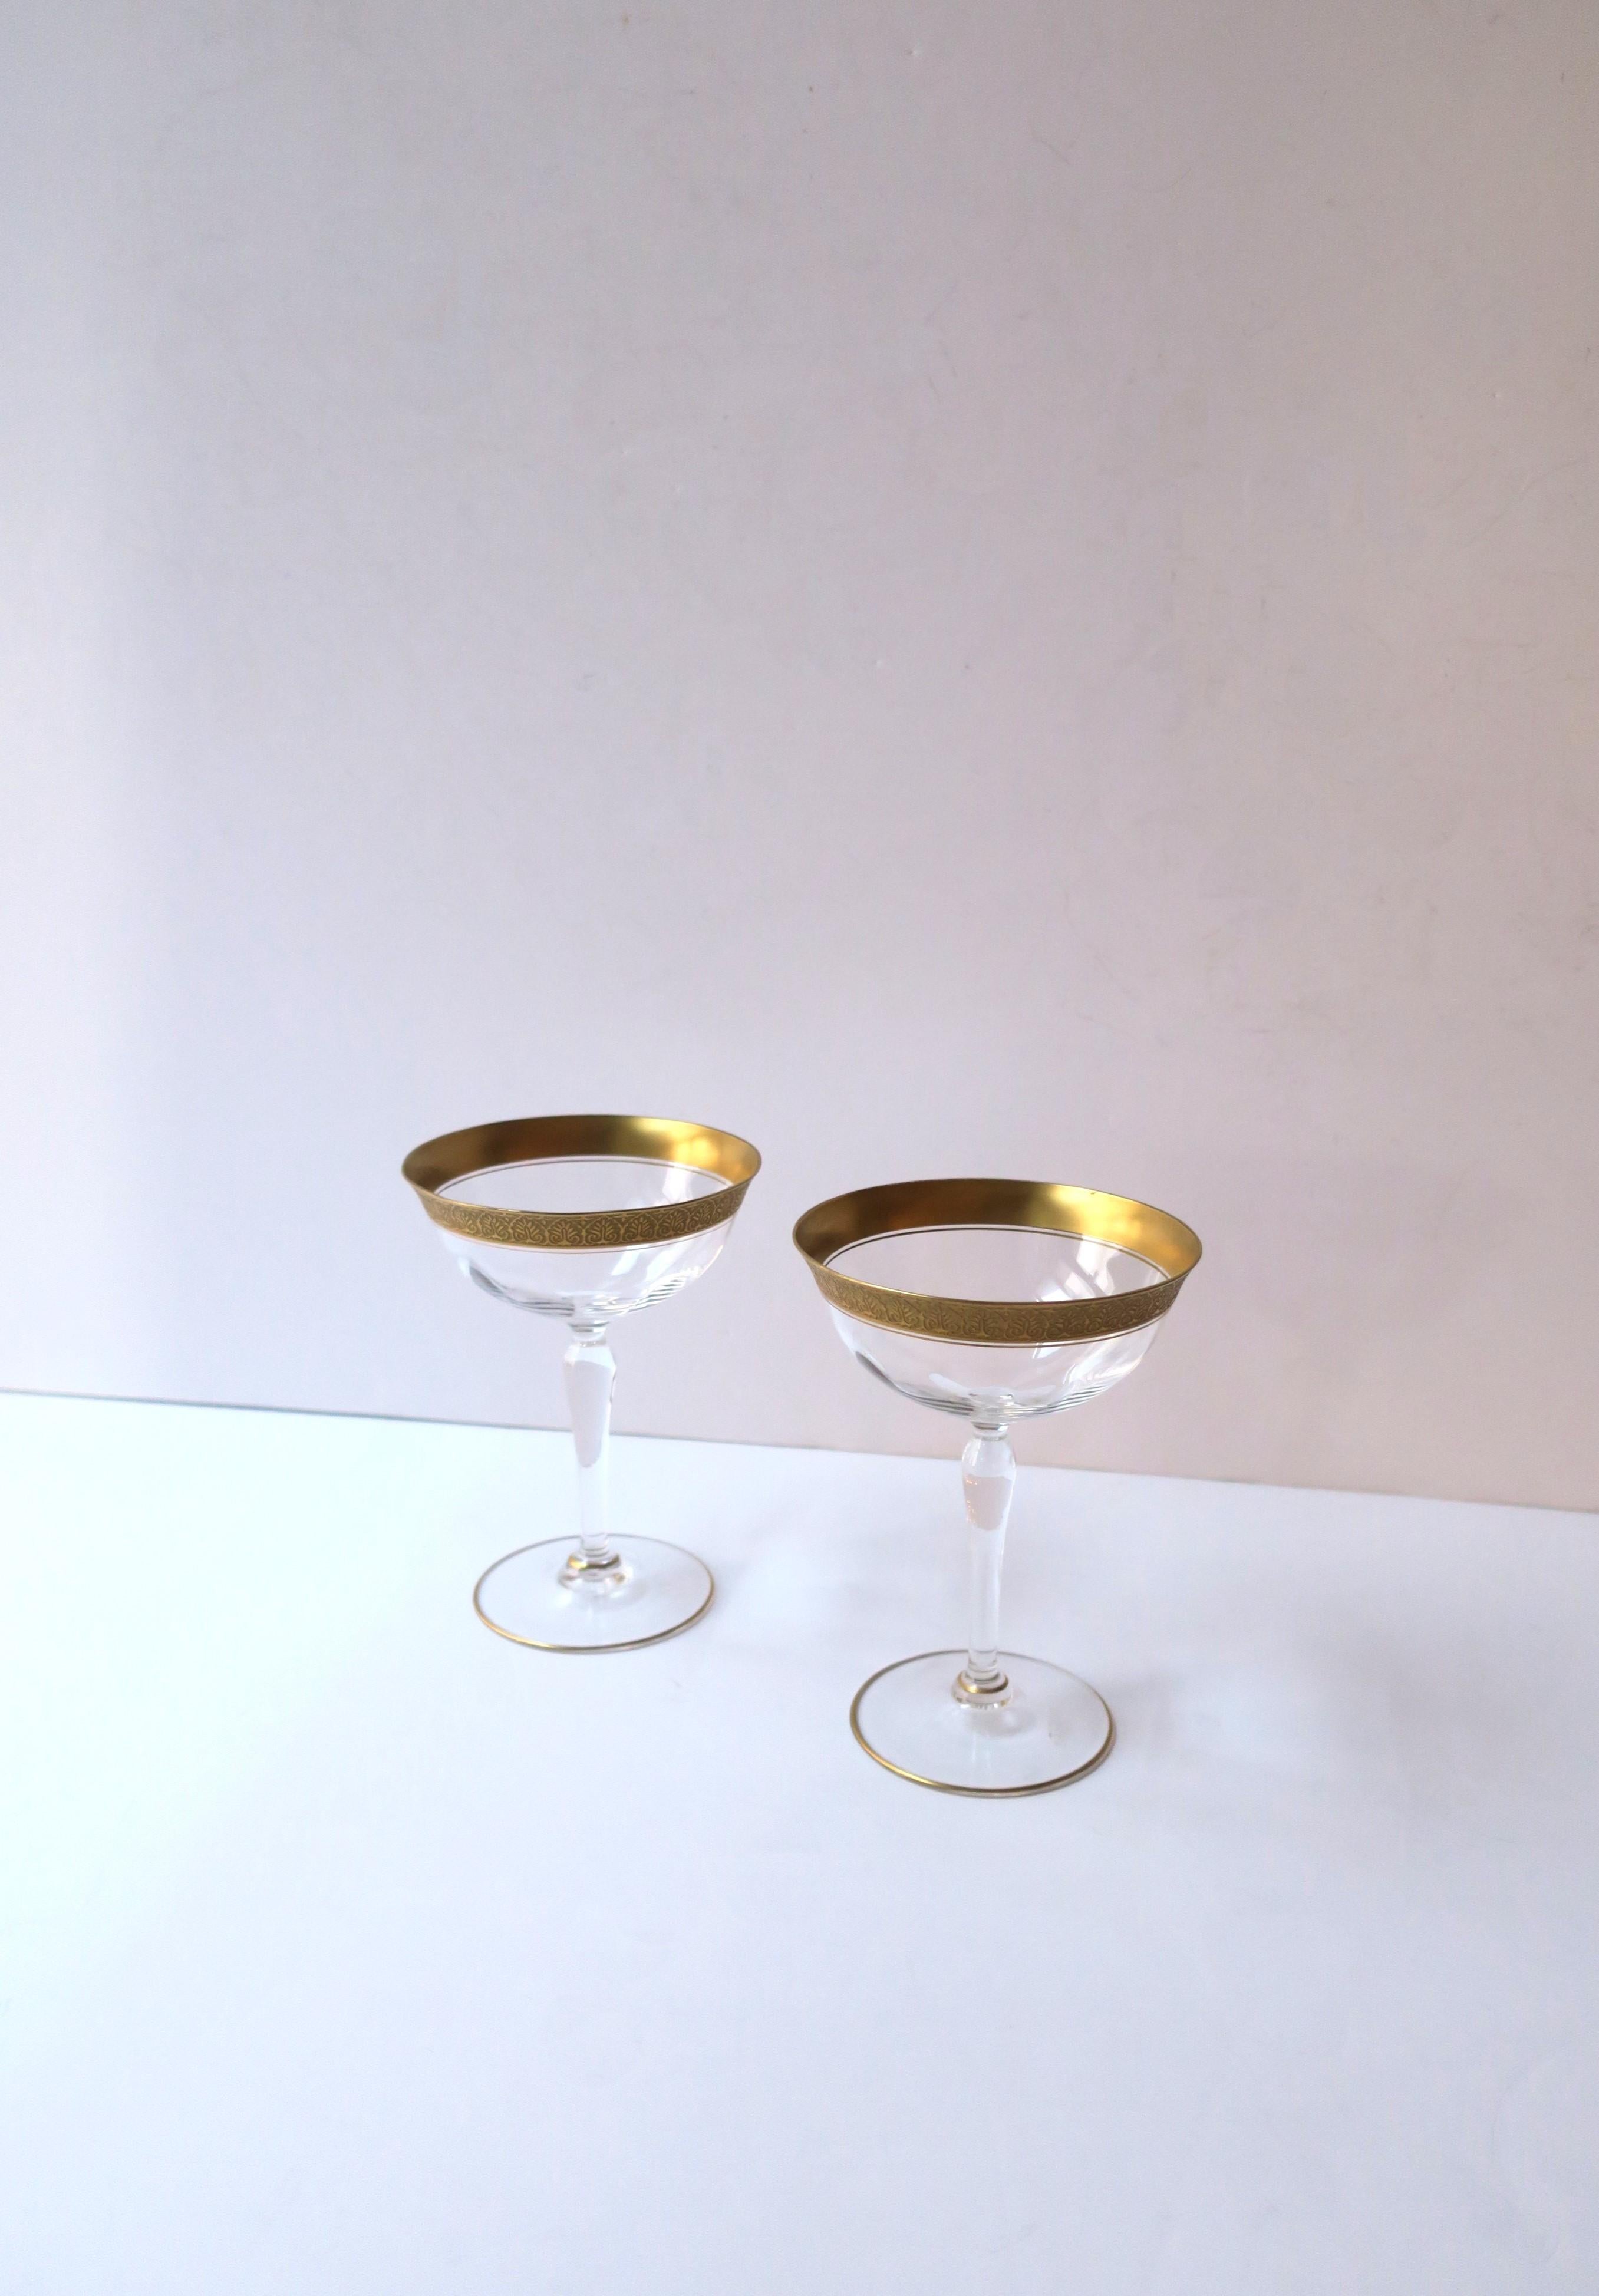 Champagne Coupes Cocktail Glasses with Gold Rim, Pair For Sale 1